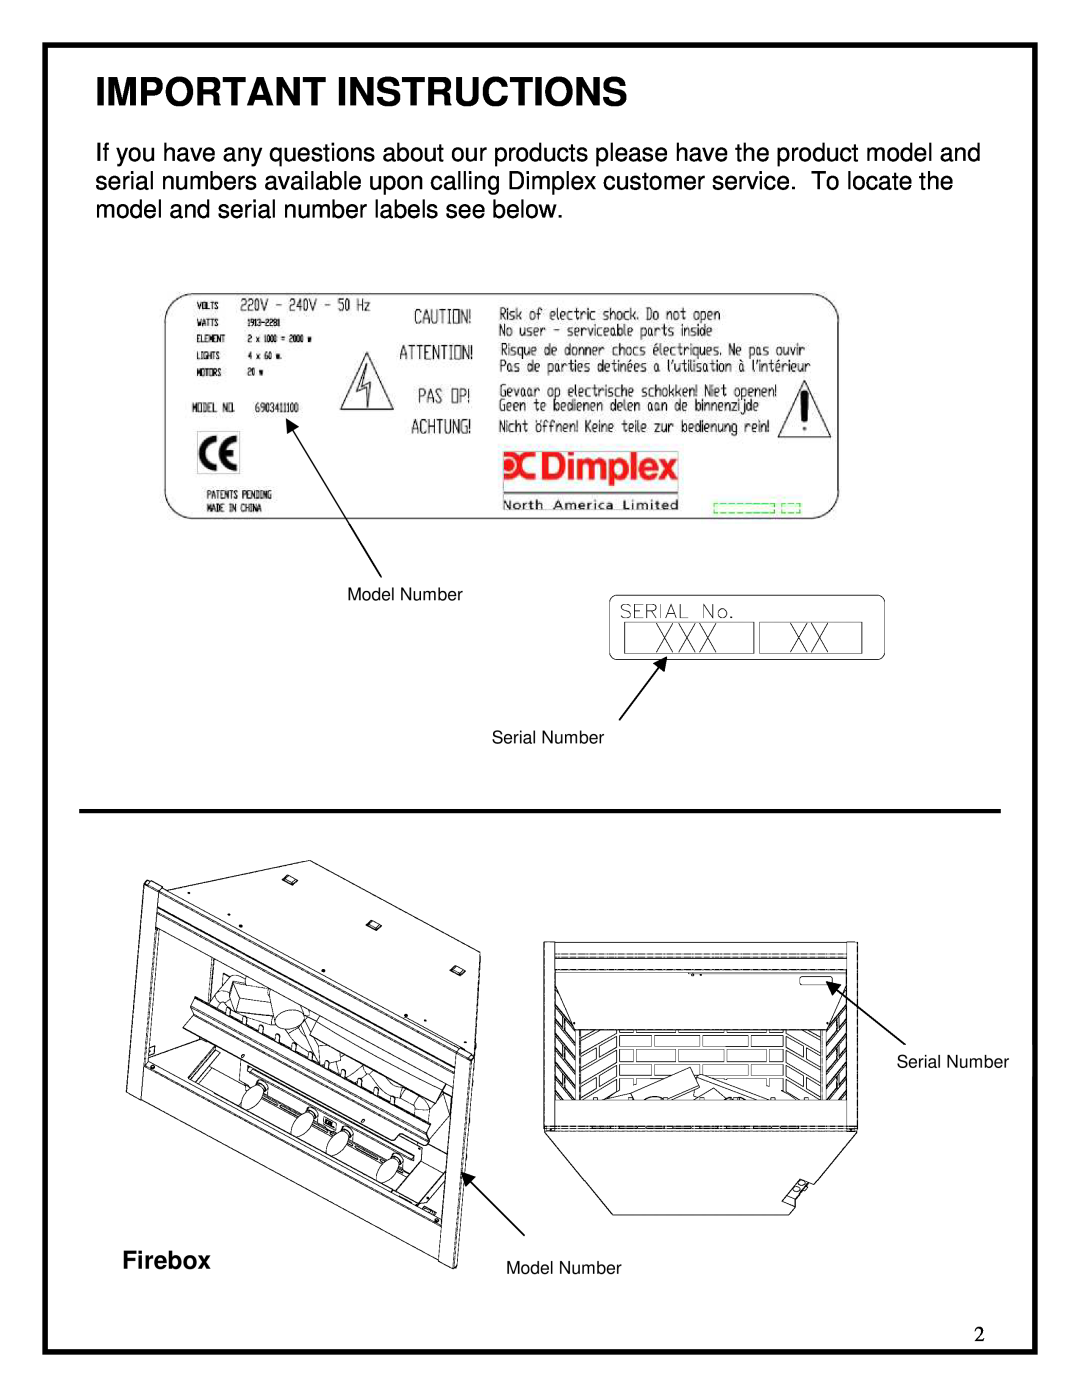 Dimplex BF series manual Important Instructions, Firebox 